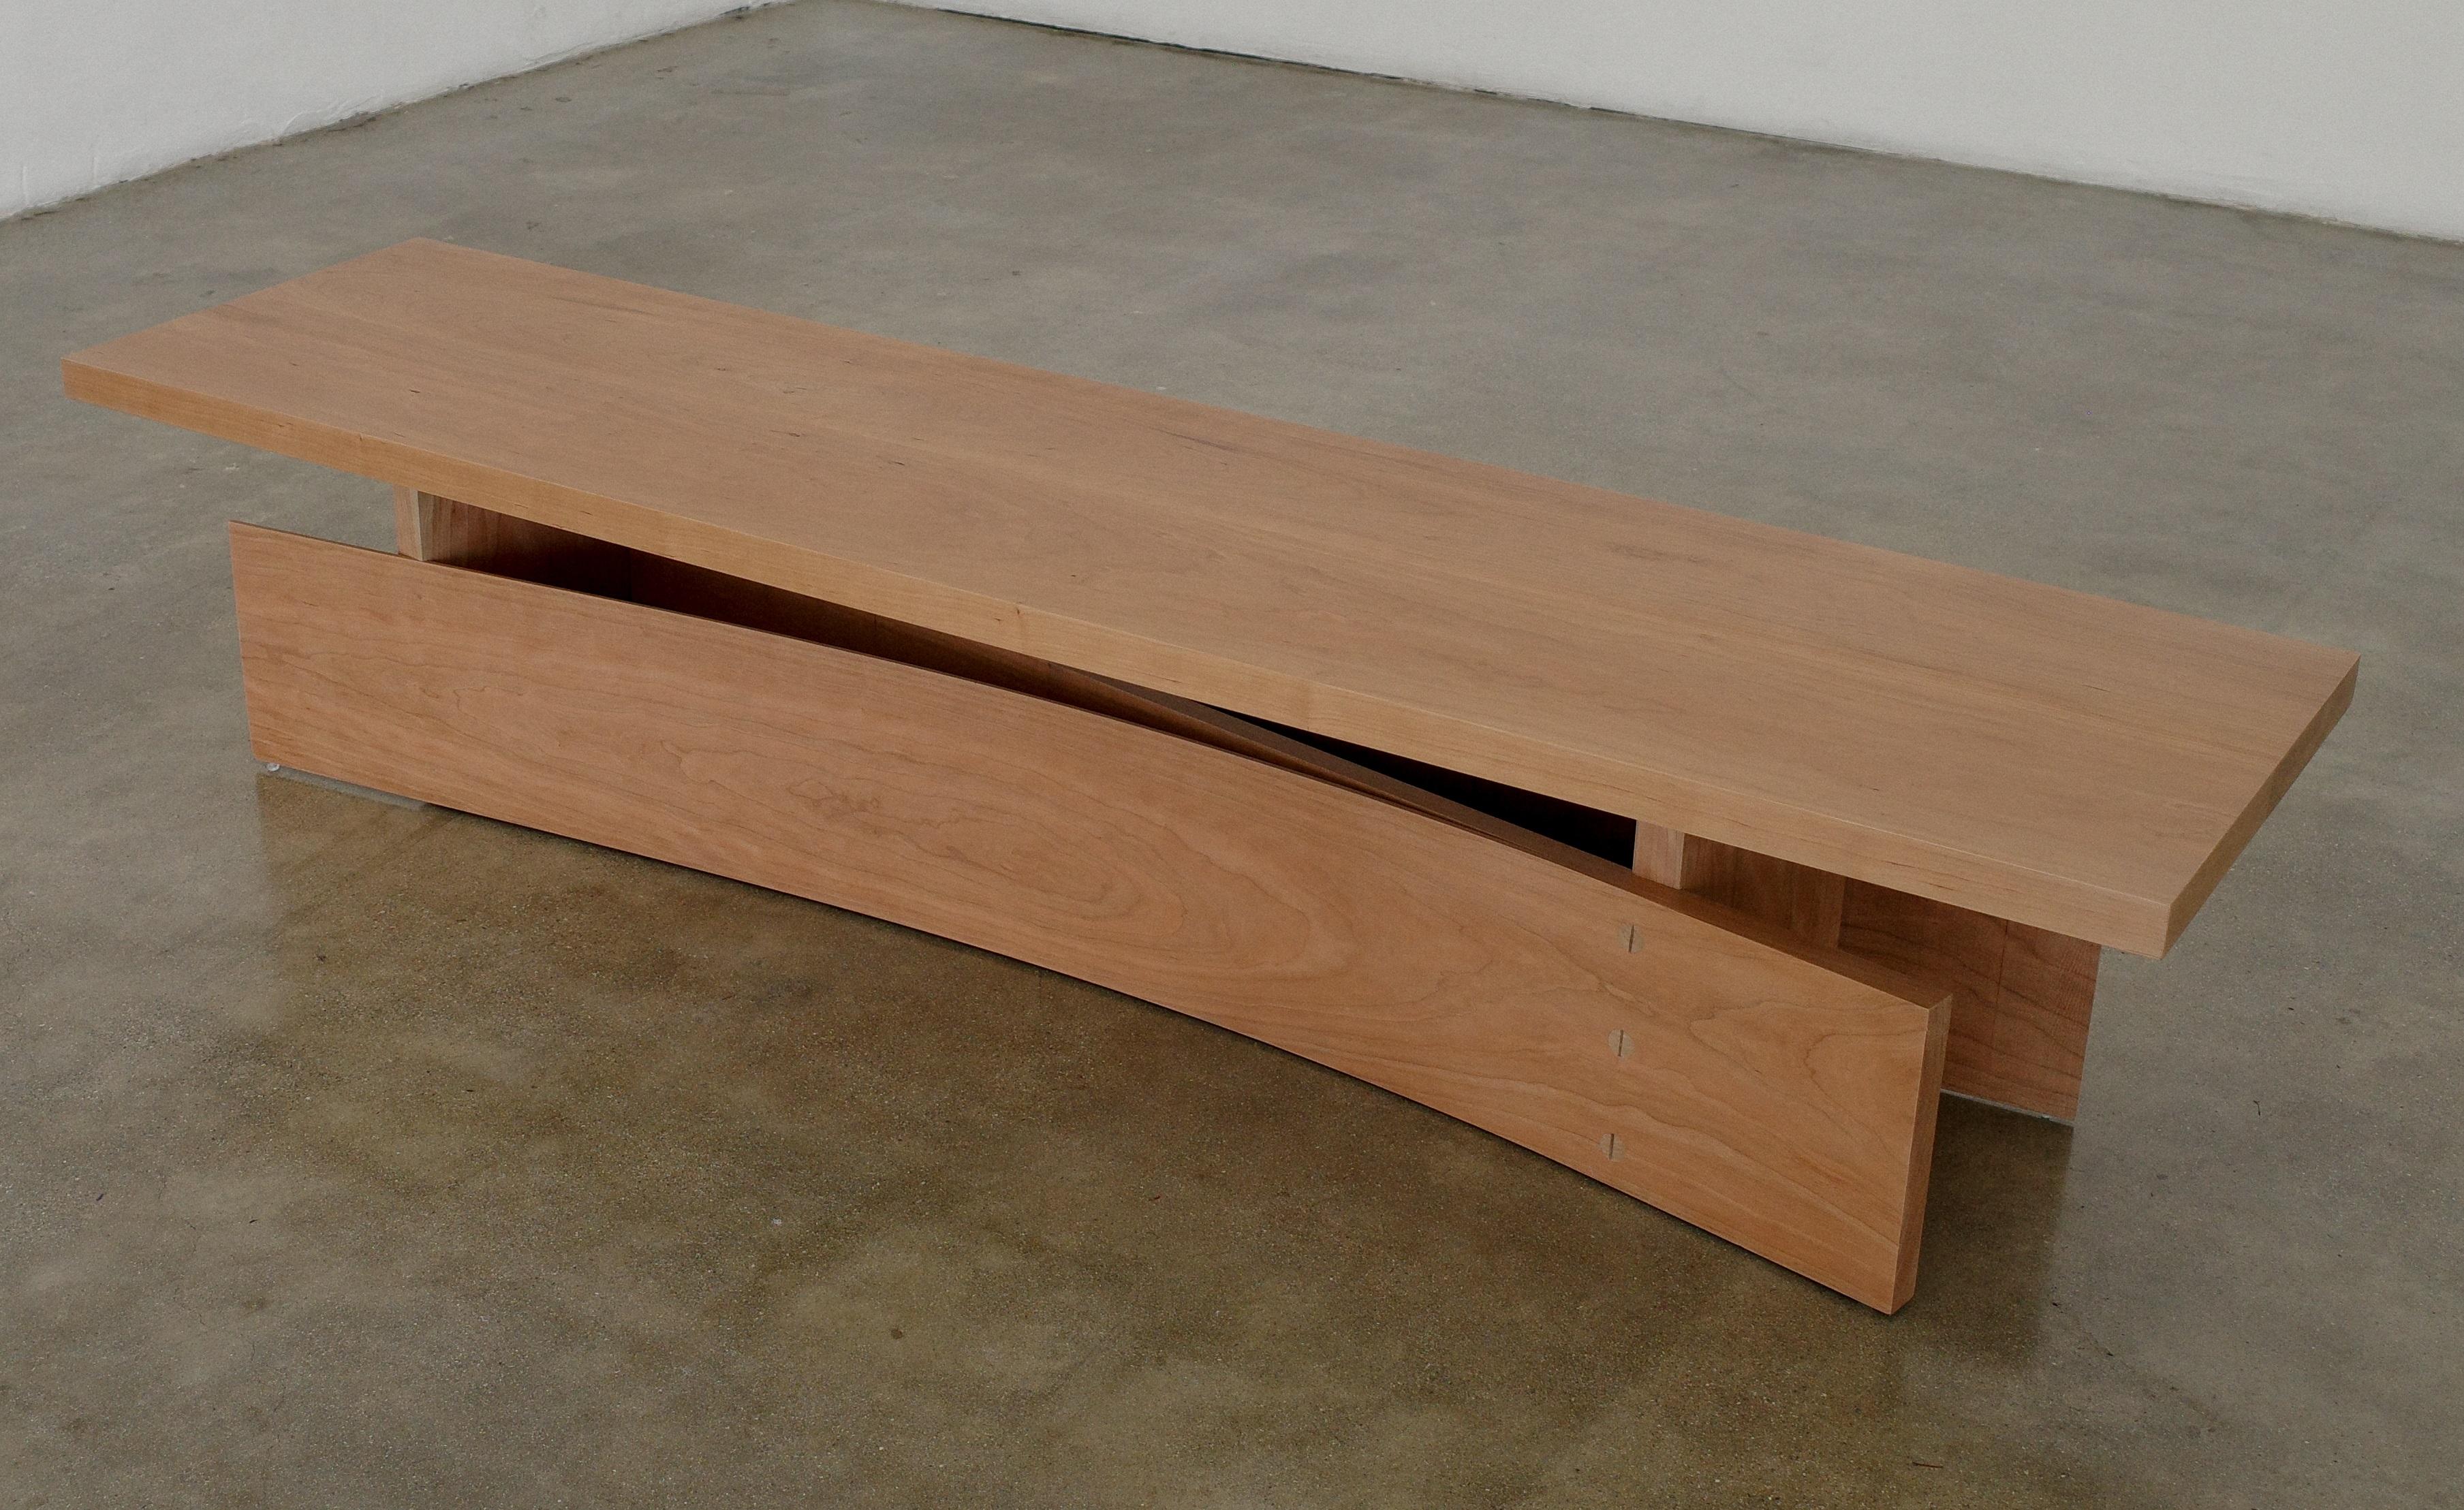 Cold bent bench by Nick Pourfard.
Dimensions: D 56 x W 213.5 x H 43 cm.
Materials: wood.
Different finishes available. 

Wood is bent without steam or lamination, playing advantage to tension and memory built into the wood